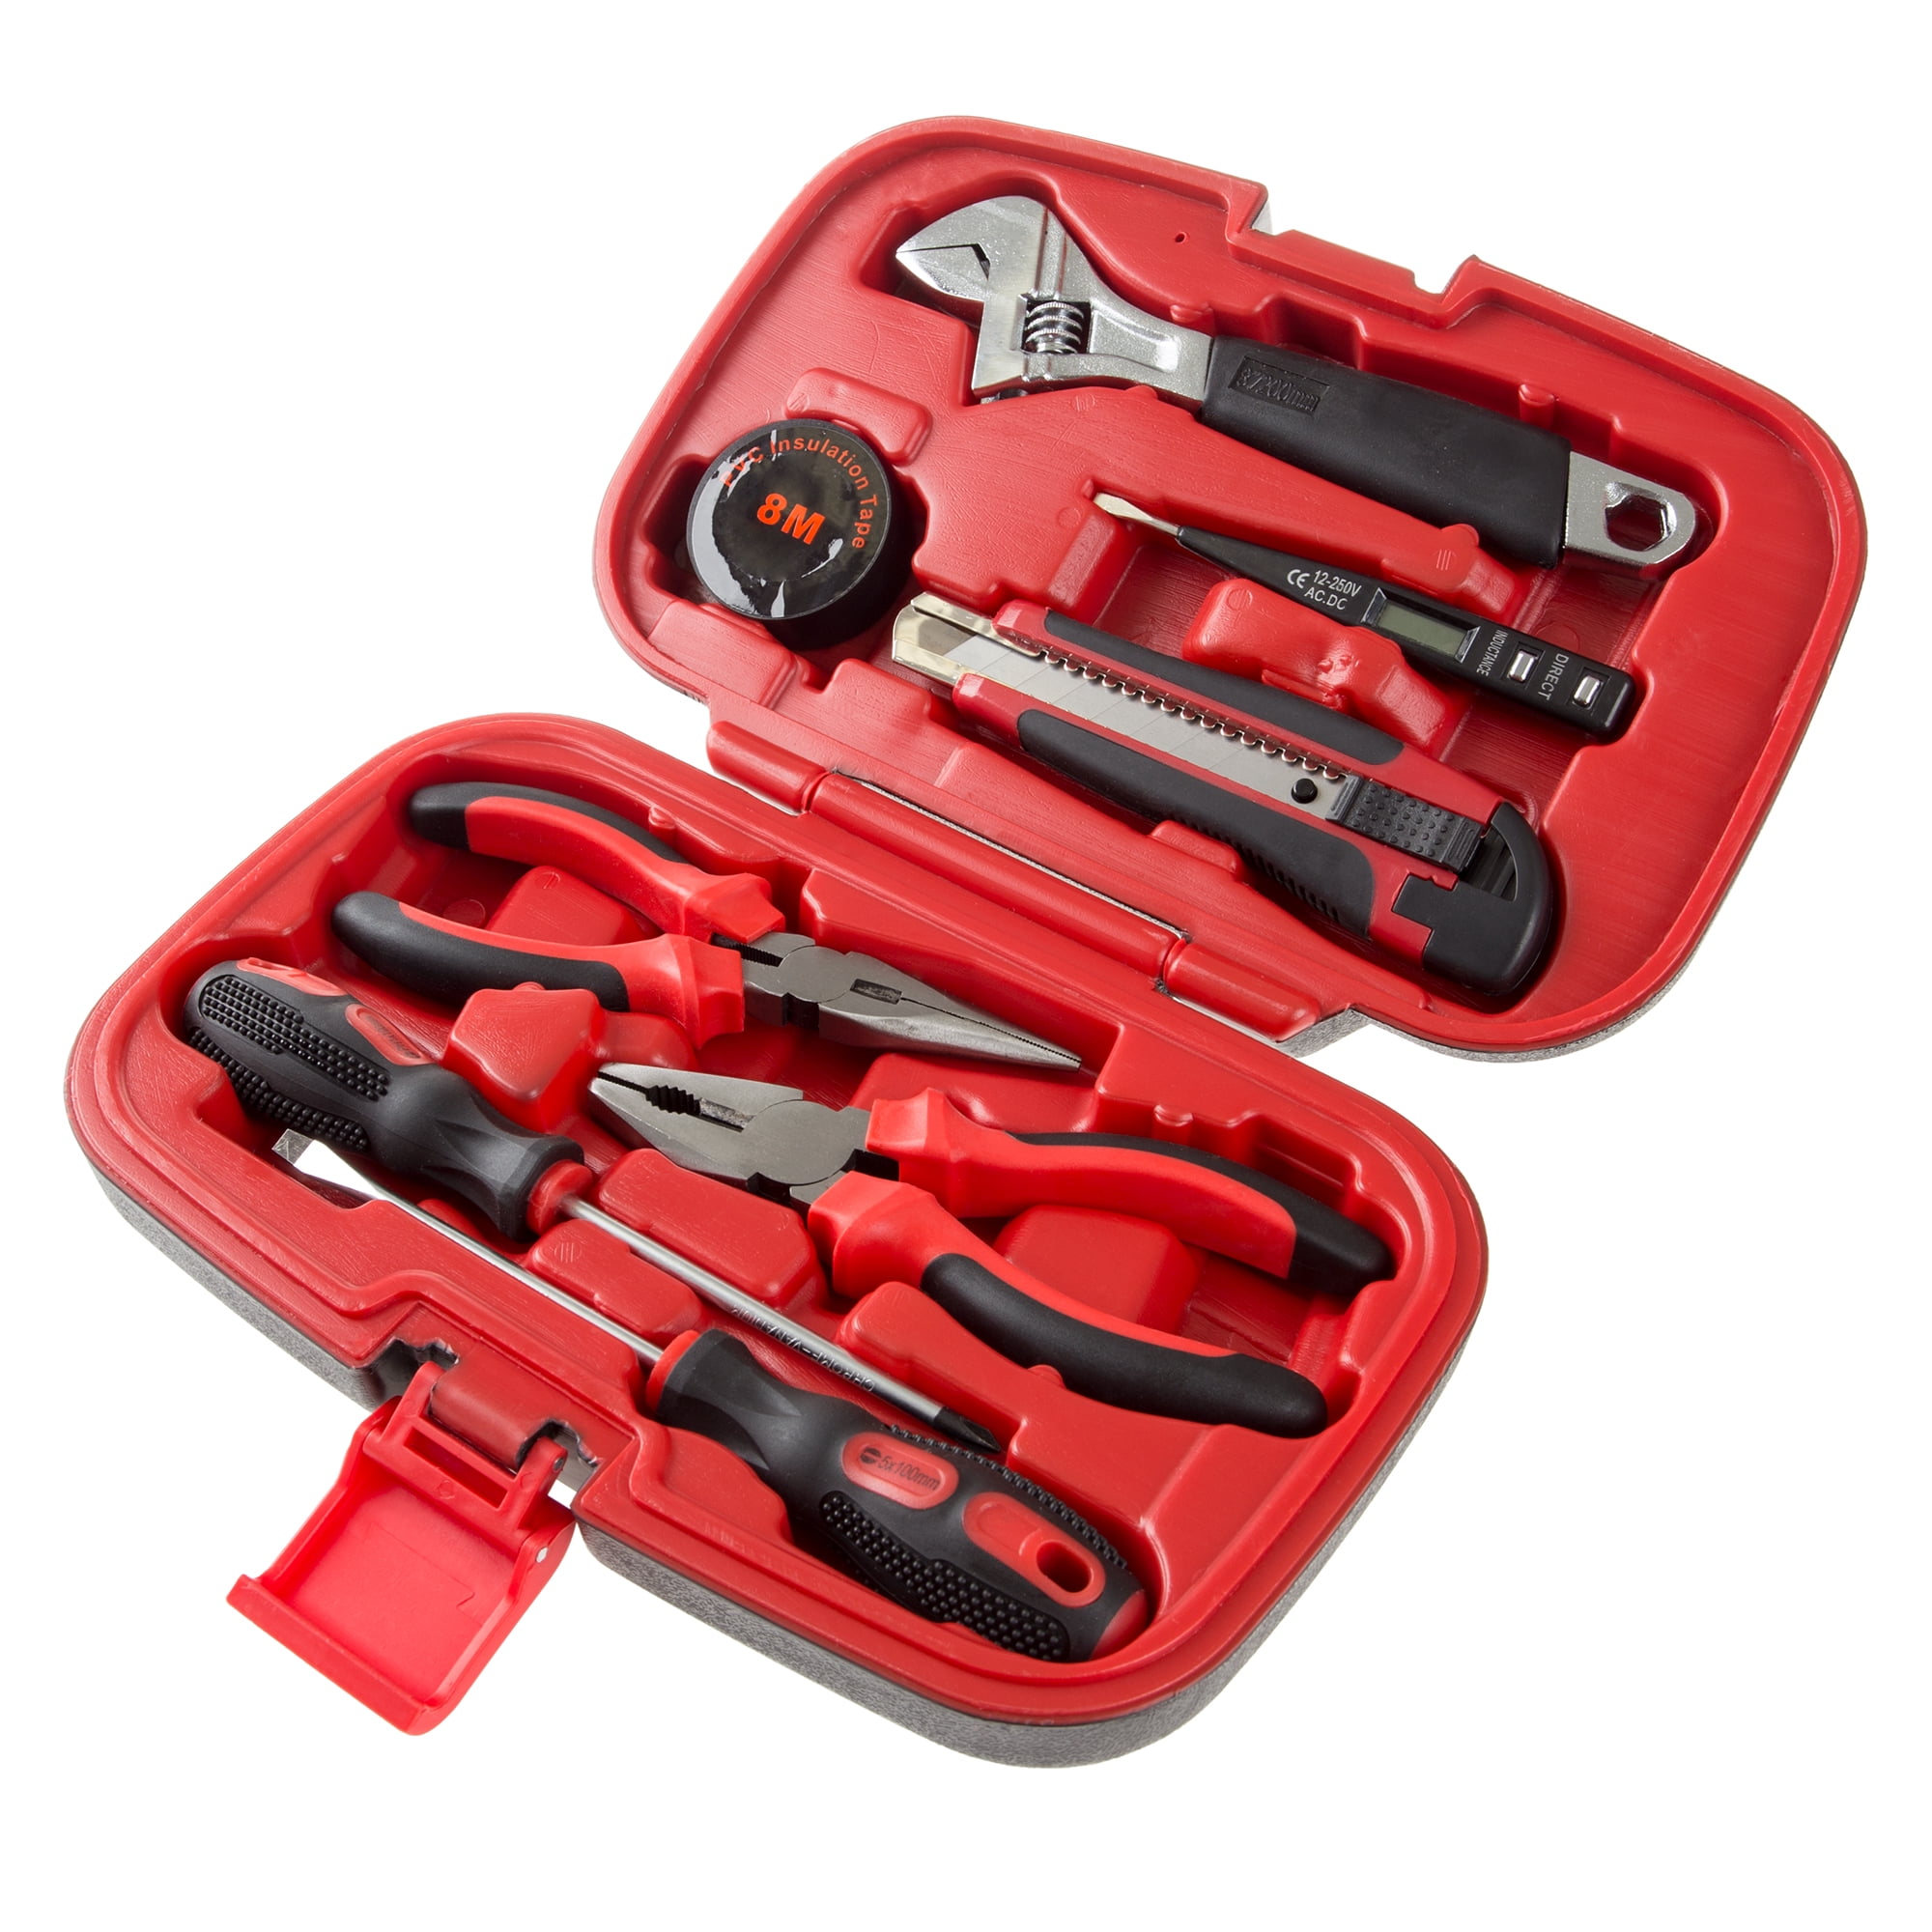 Household Hand Tools Tool Set 9 Piece by Stalwart Set